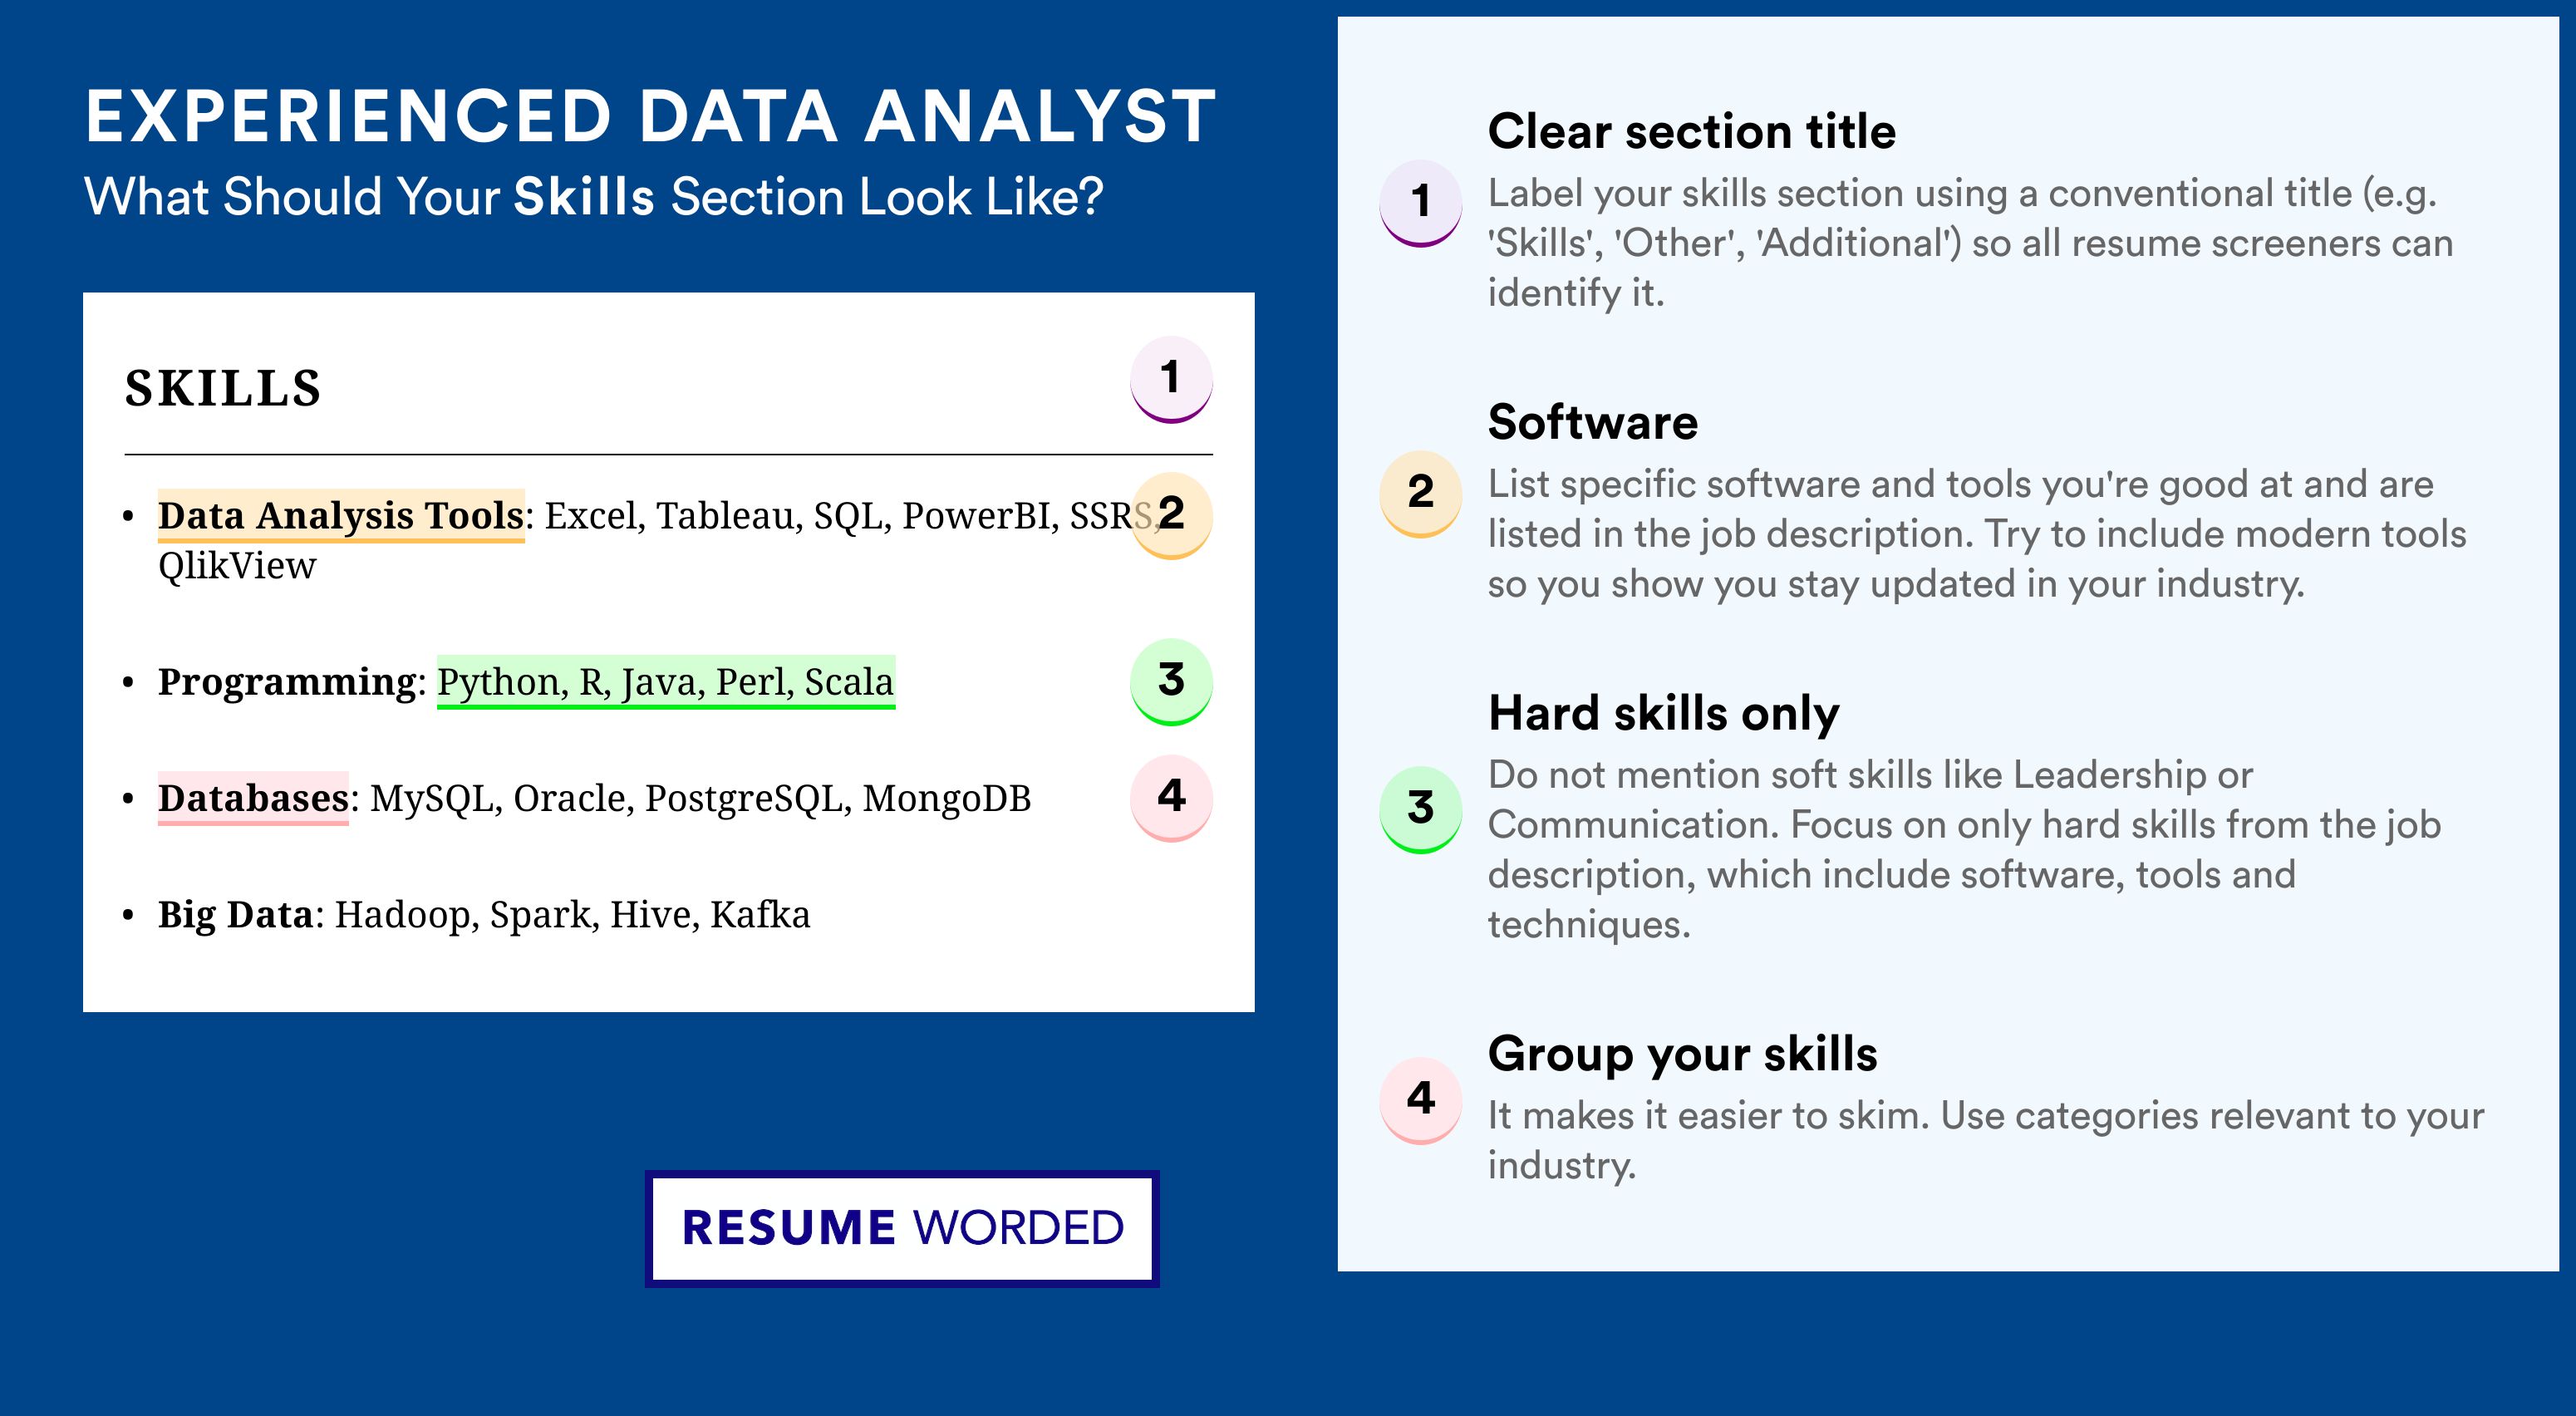 How To Write Your Skills Section - Experienced Data Analyst Roles